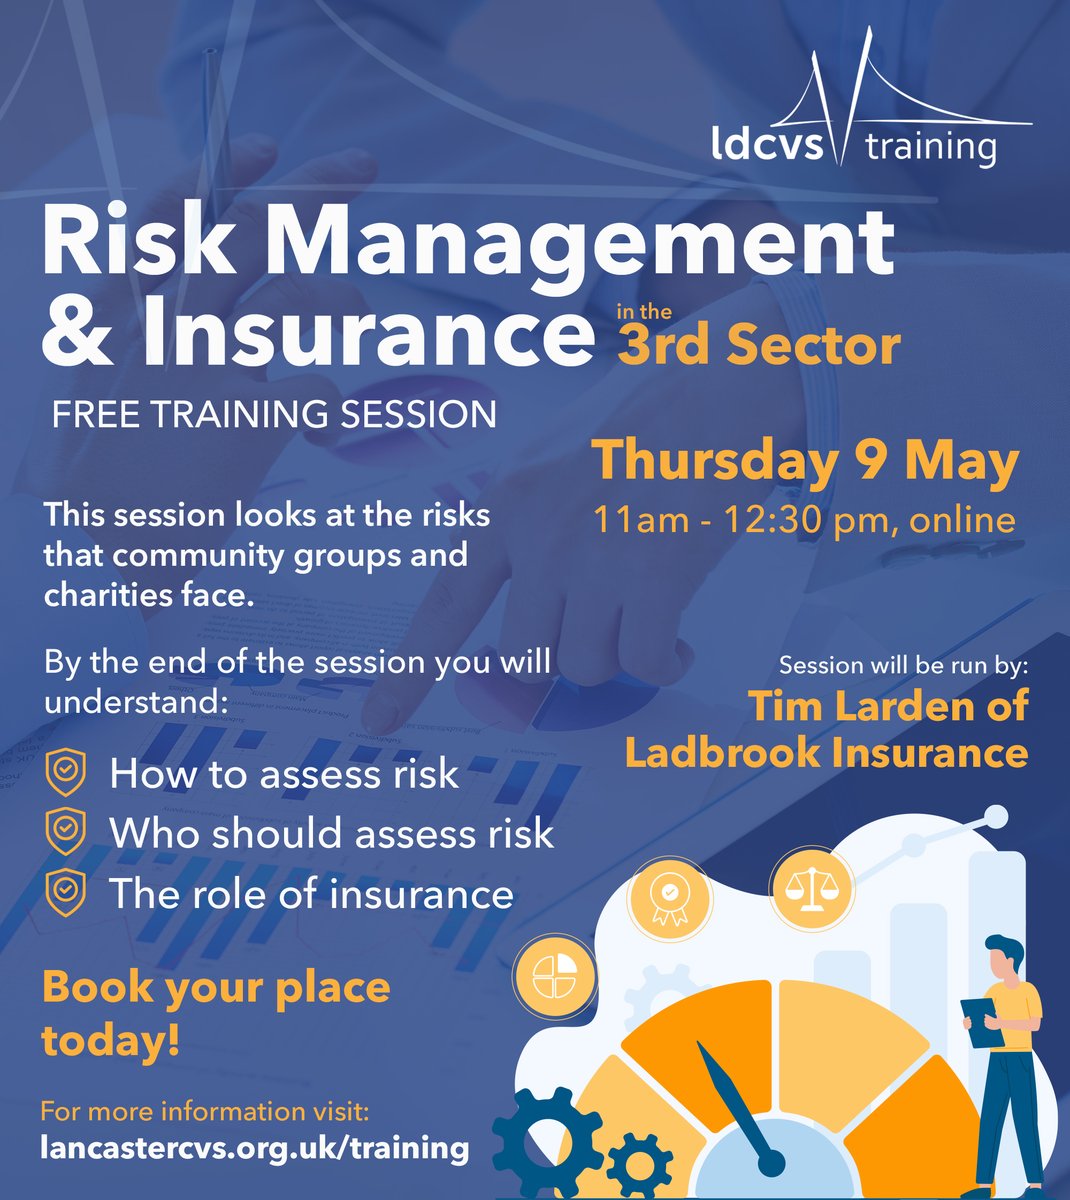 📢 Register for our online session this Thurs on #RiskManagement and Insurance led by Tim Larden from Ladbrook #Insurance🛡️ Gain valuable insights assessing risks + understanding insurance. 📅 May 9 11am - 12:30pm Register now: tinyurl.com/mry8ax84 #Nonprofits #CommunityGroups